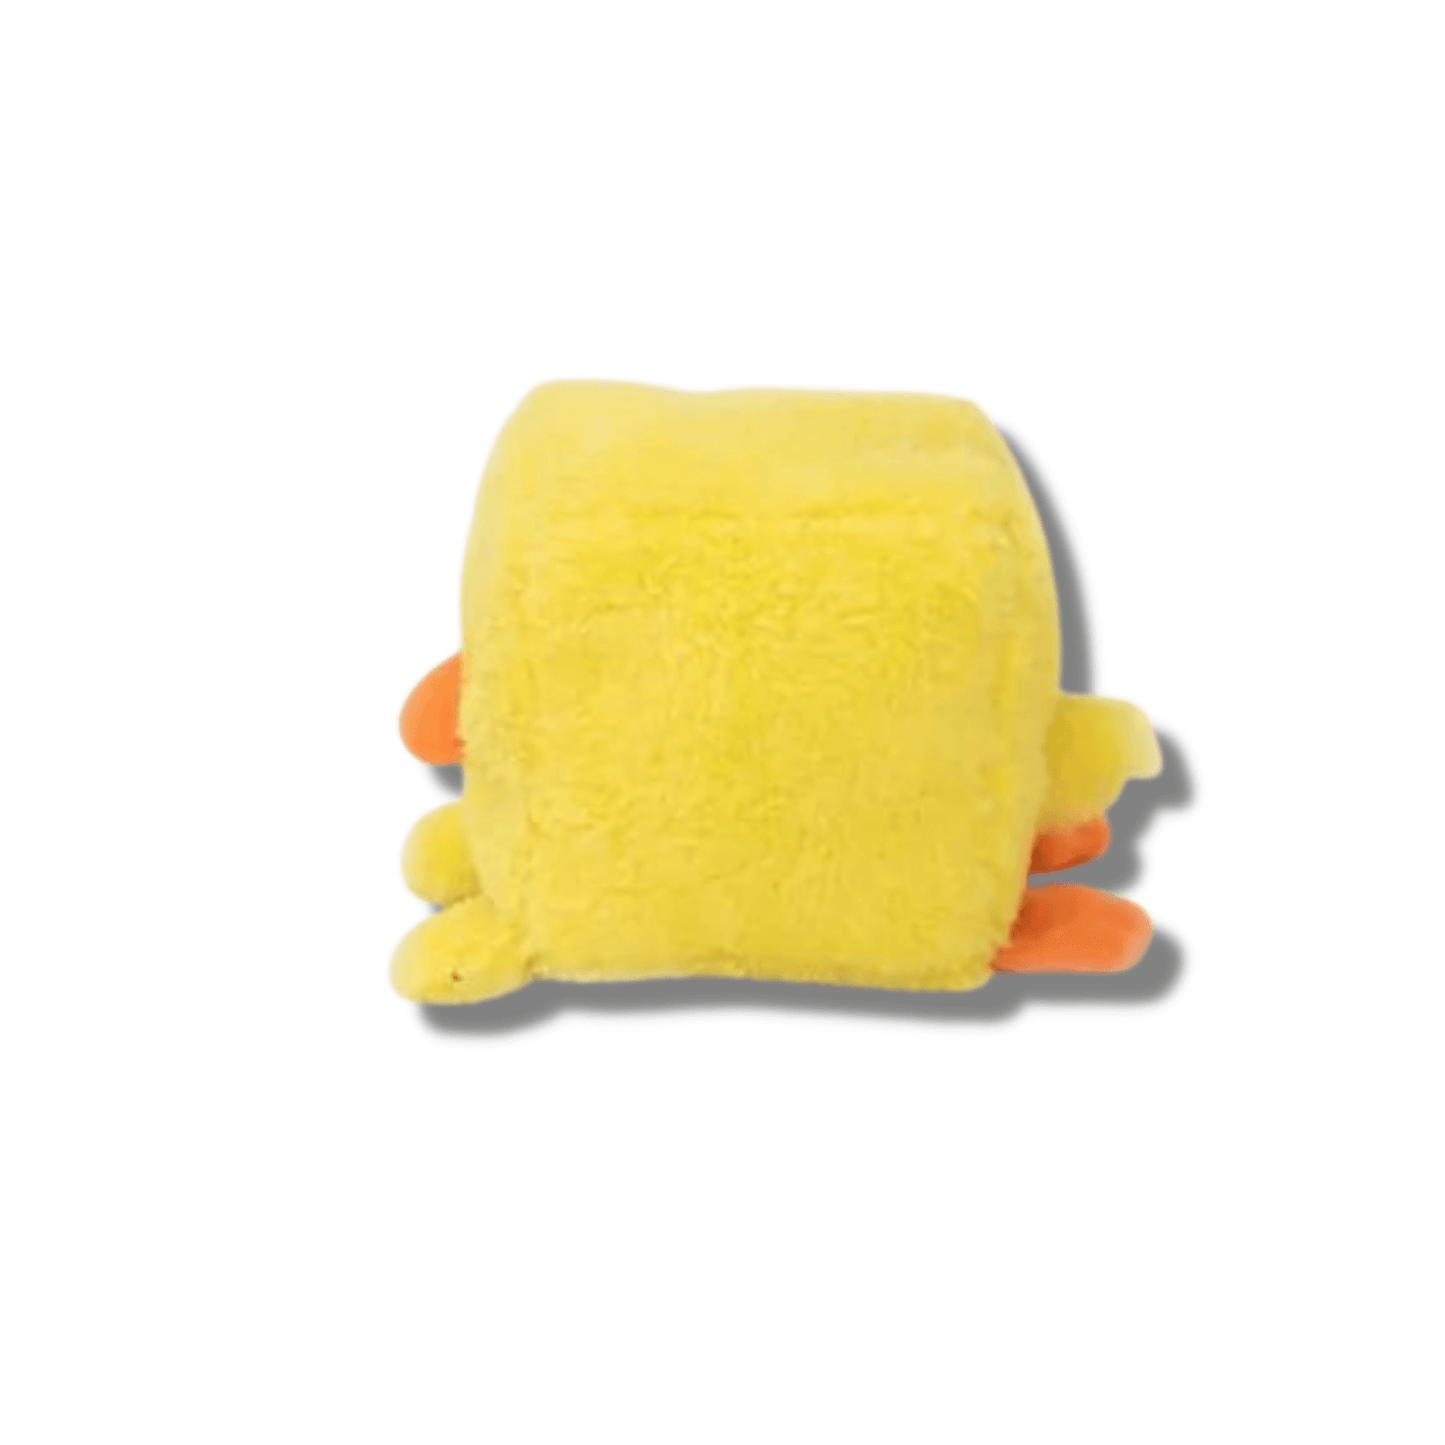 Plush squeakier dog toy duck, let's pawty Easter